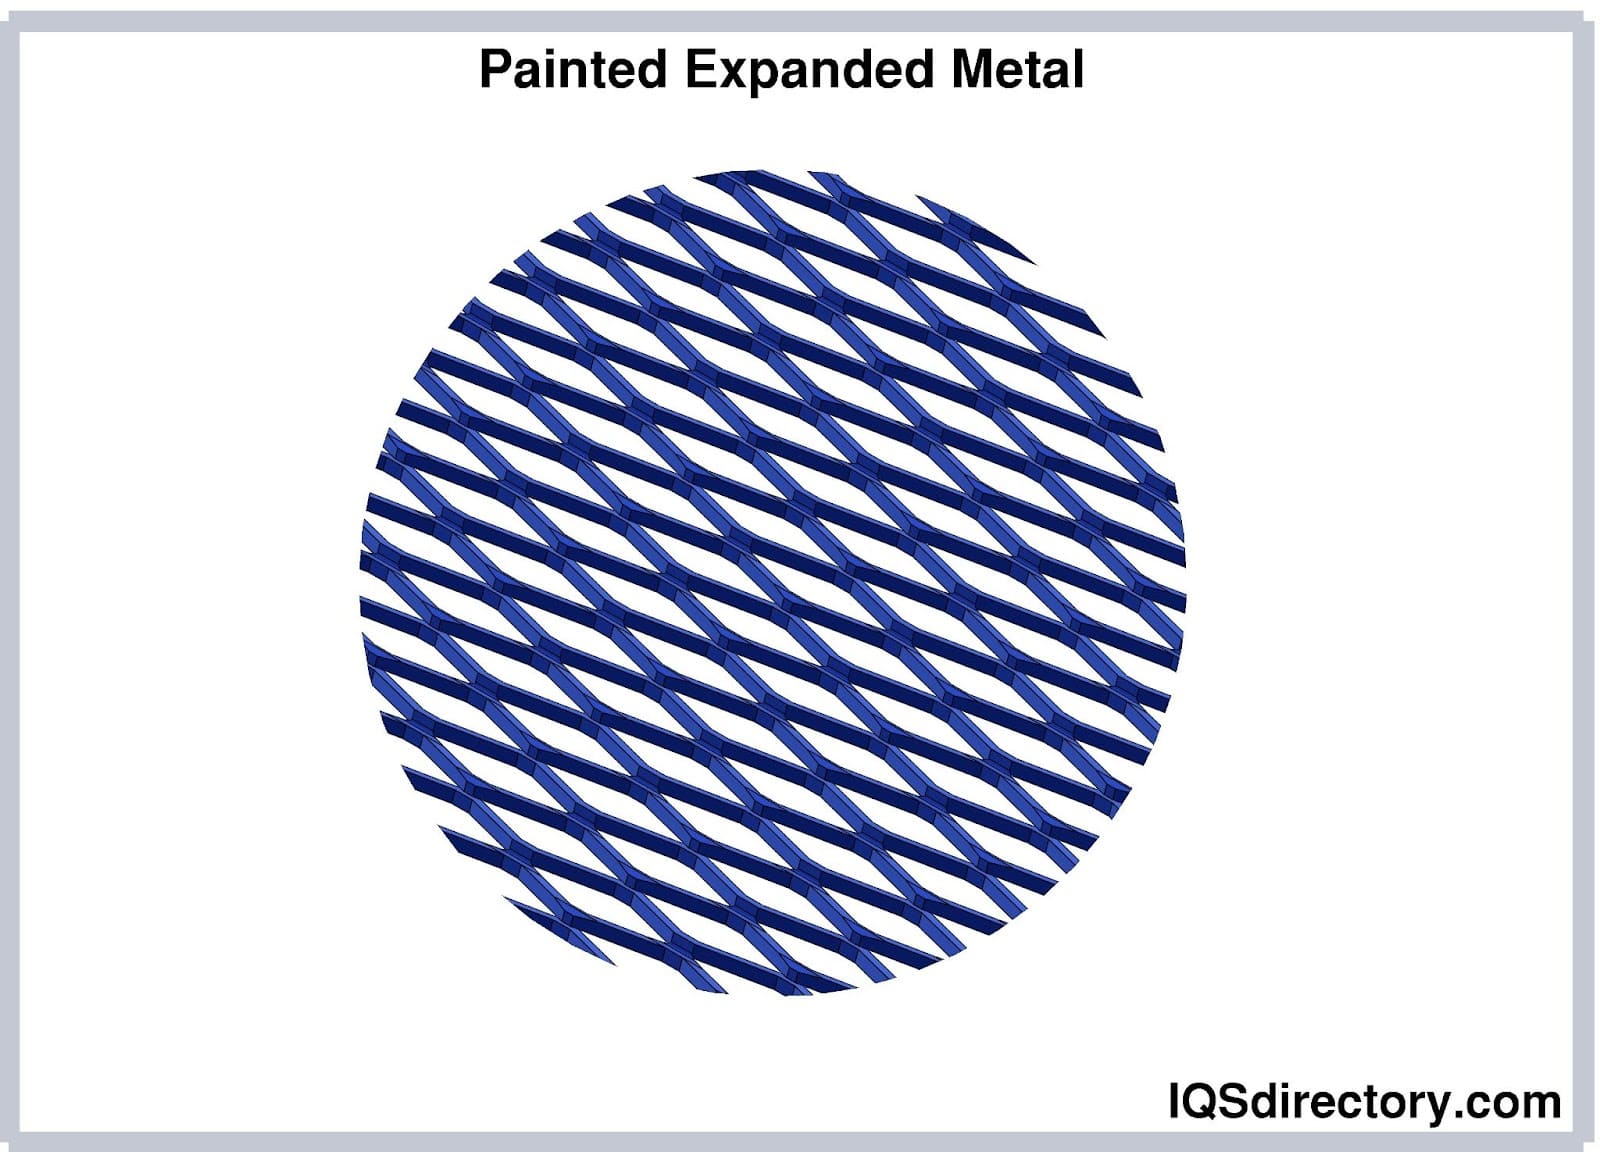 Painted Expanded Metal